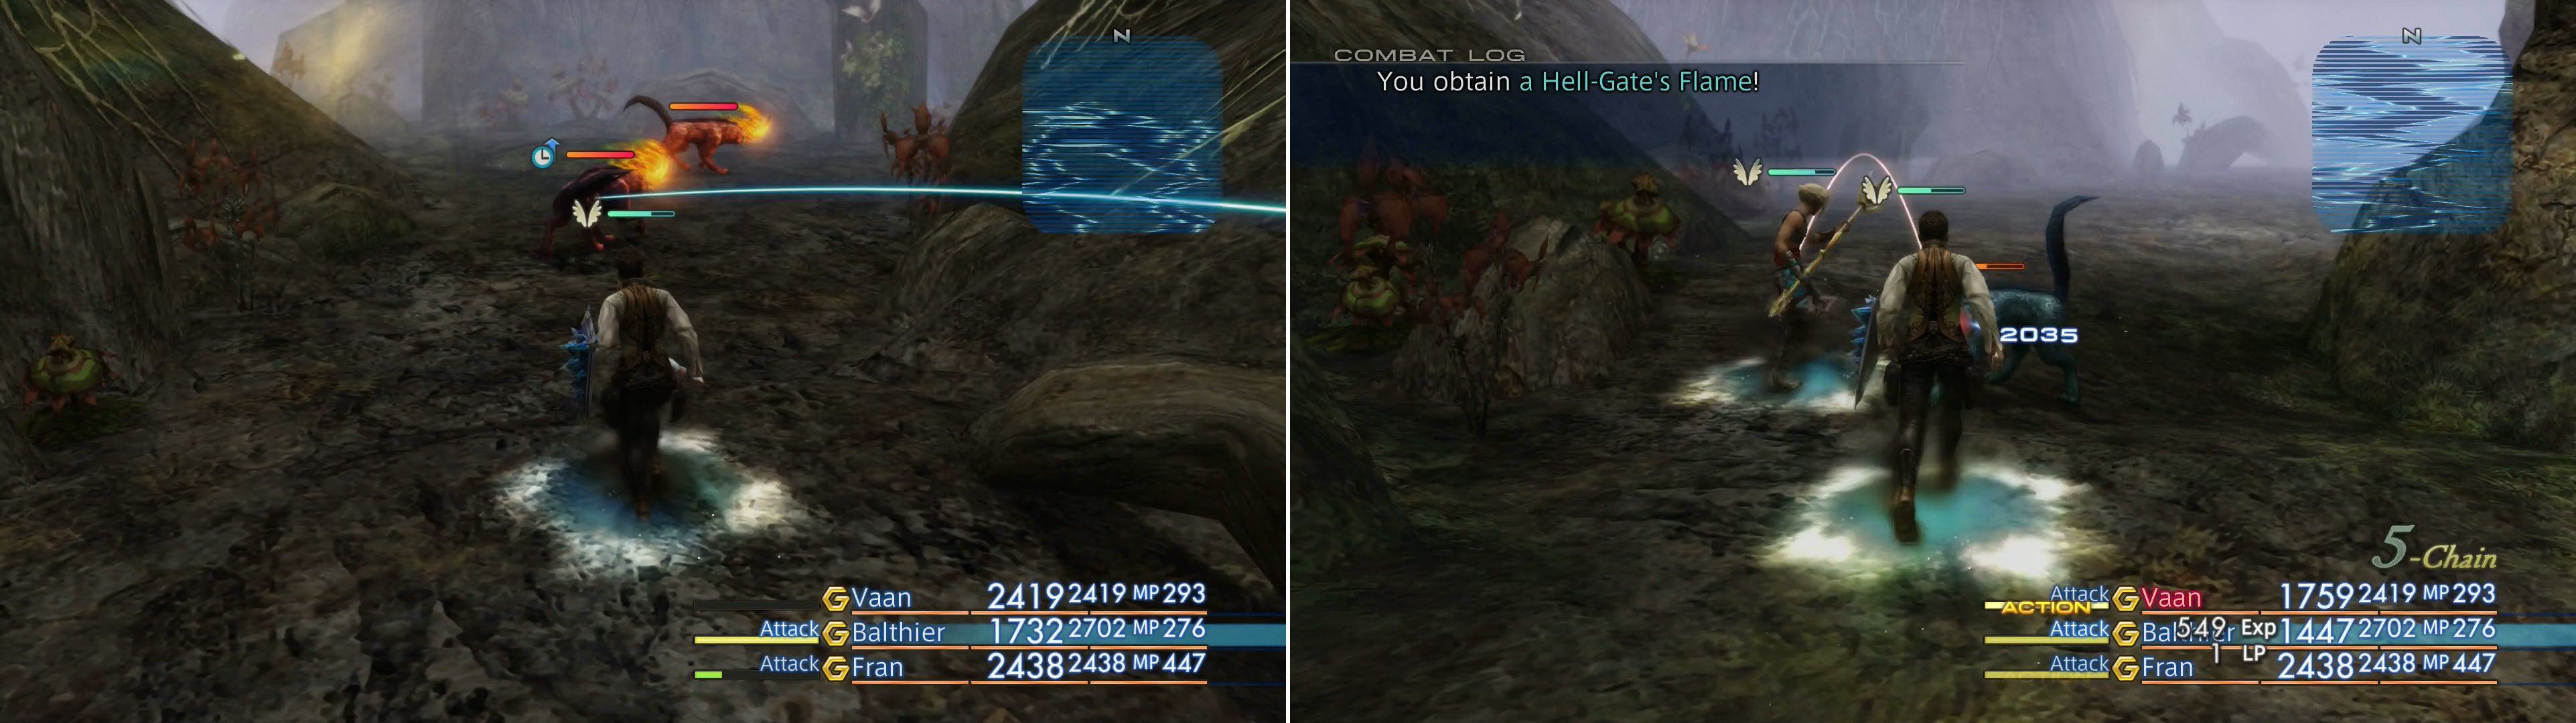 The Cerberus has a chance to spawn in place of a Tartarus (left) and can drop the valuable Hell-Gate's Flame loot (right).